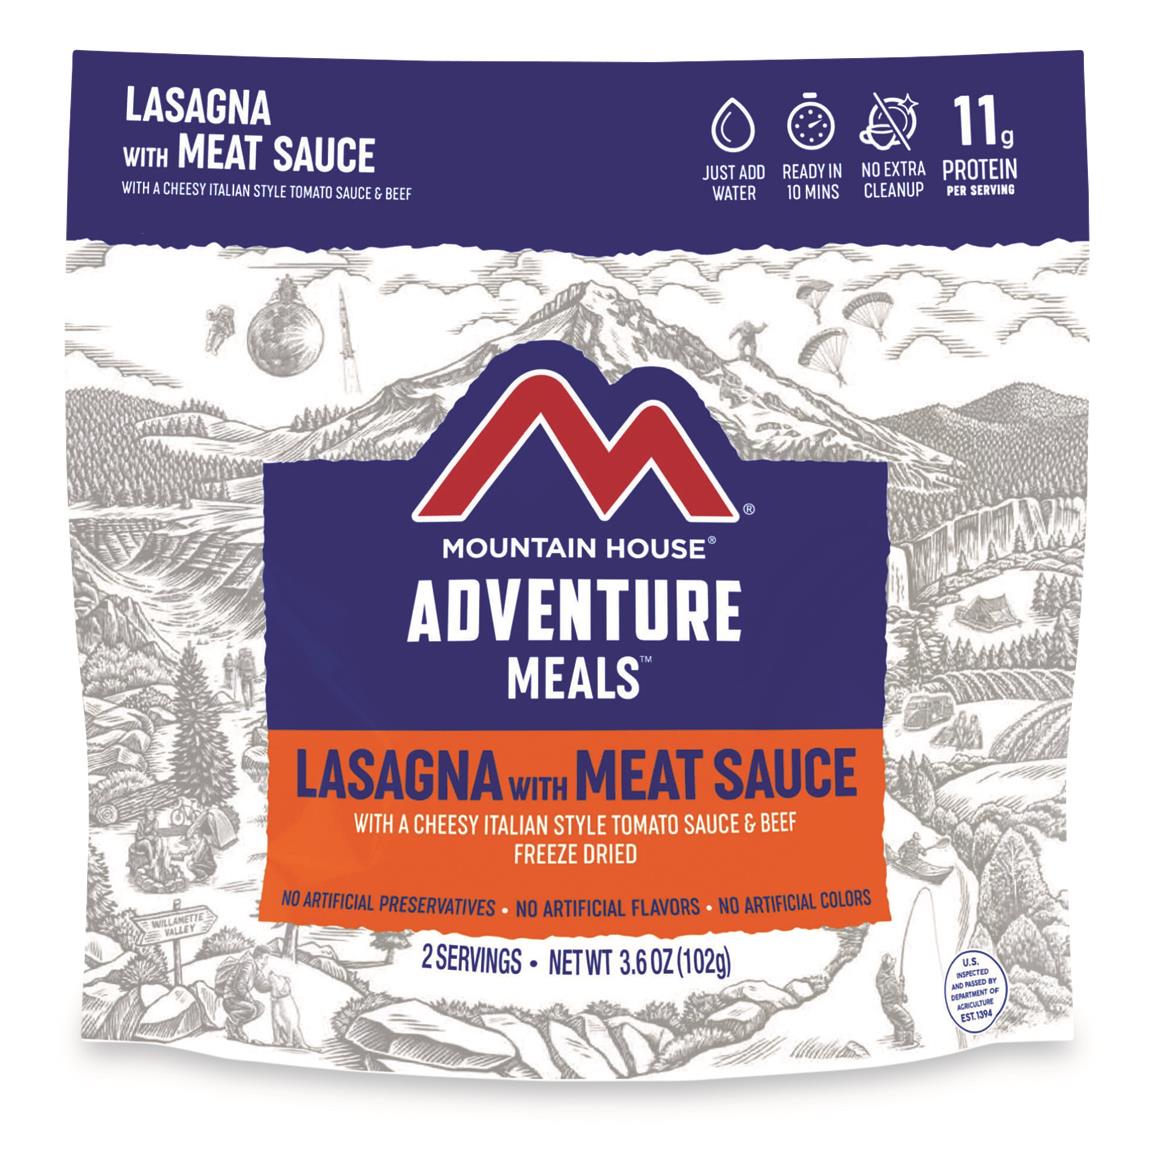 Mountain House Lasagna with Meat Sauce